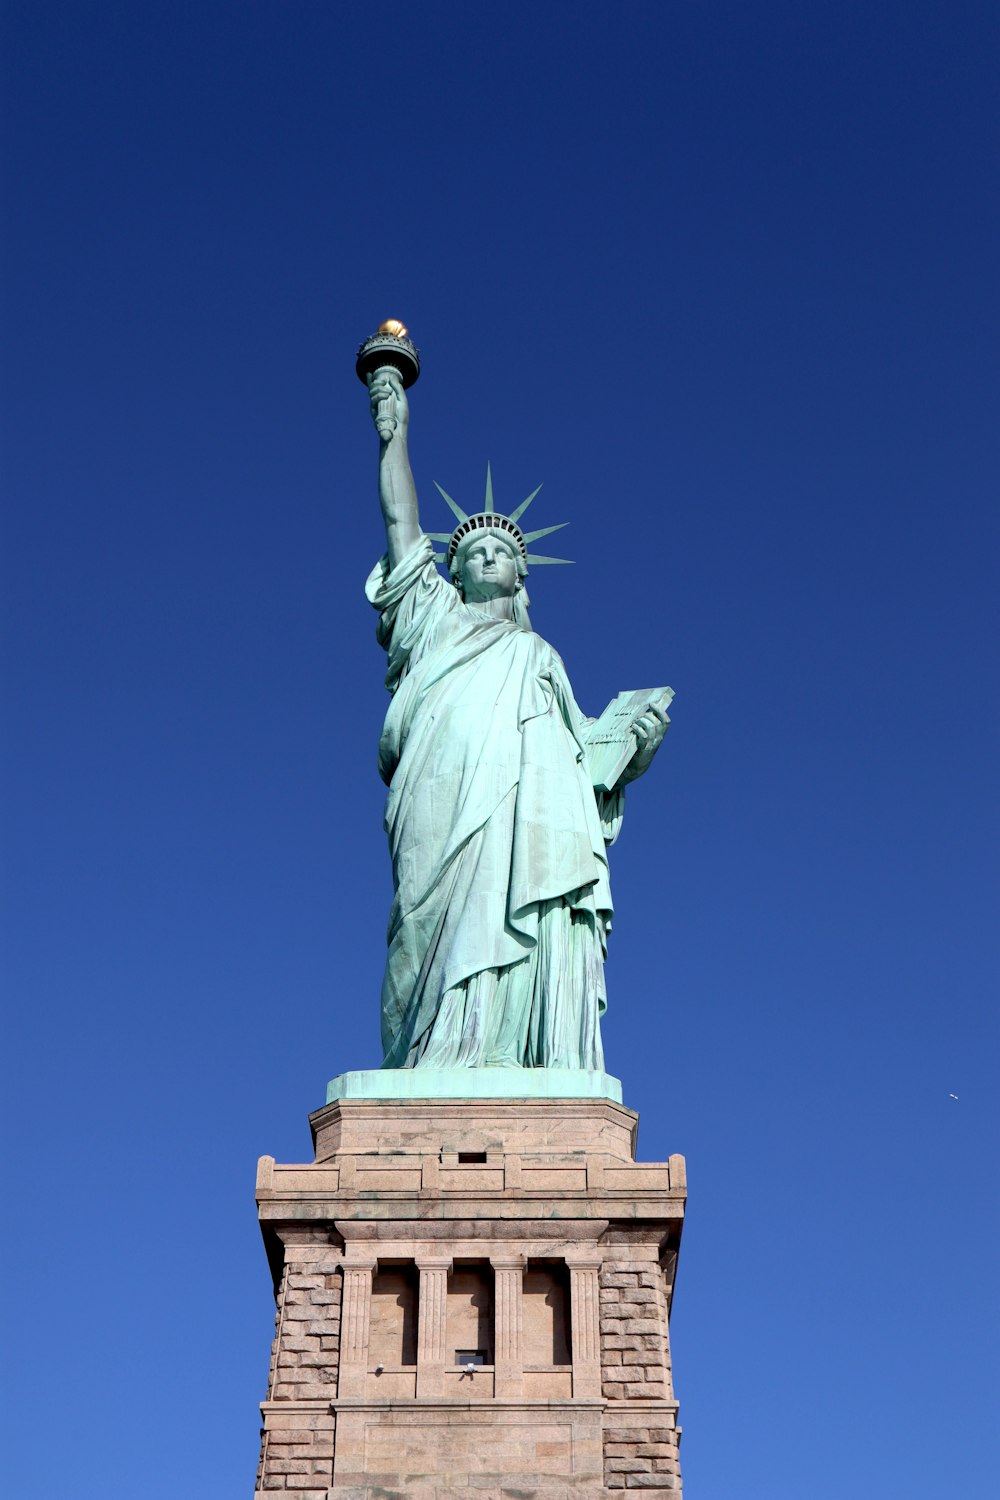 the statue of liberty is shown against a blue sky